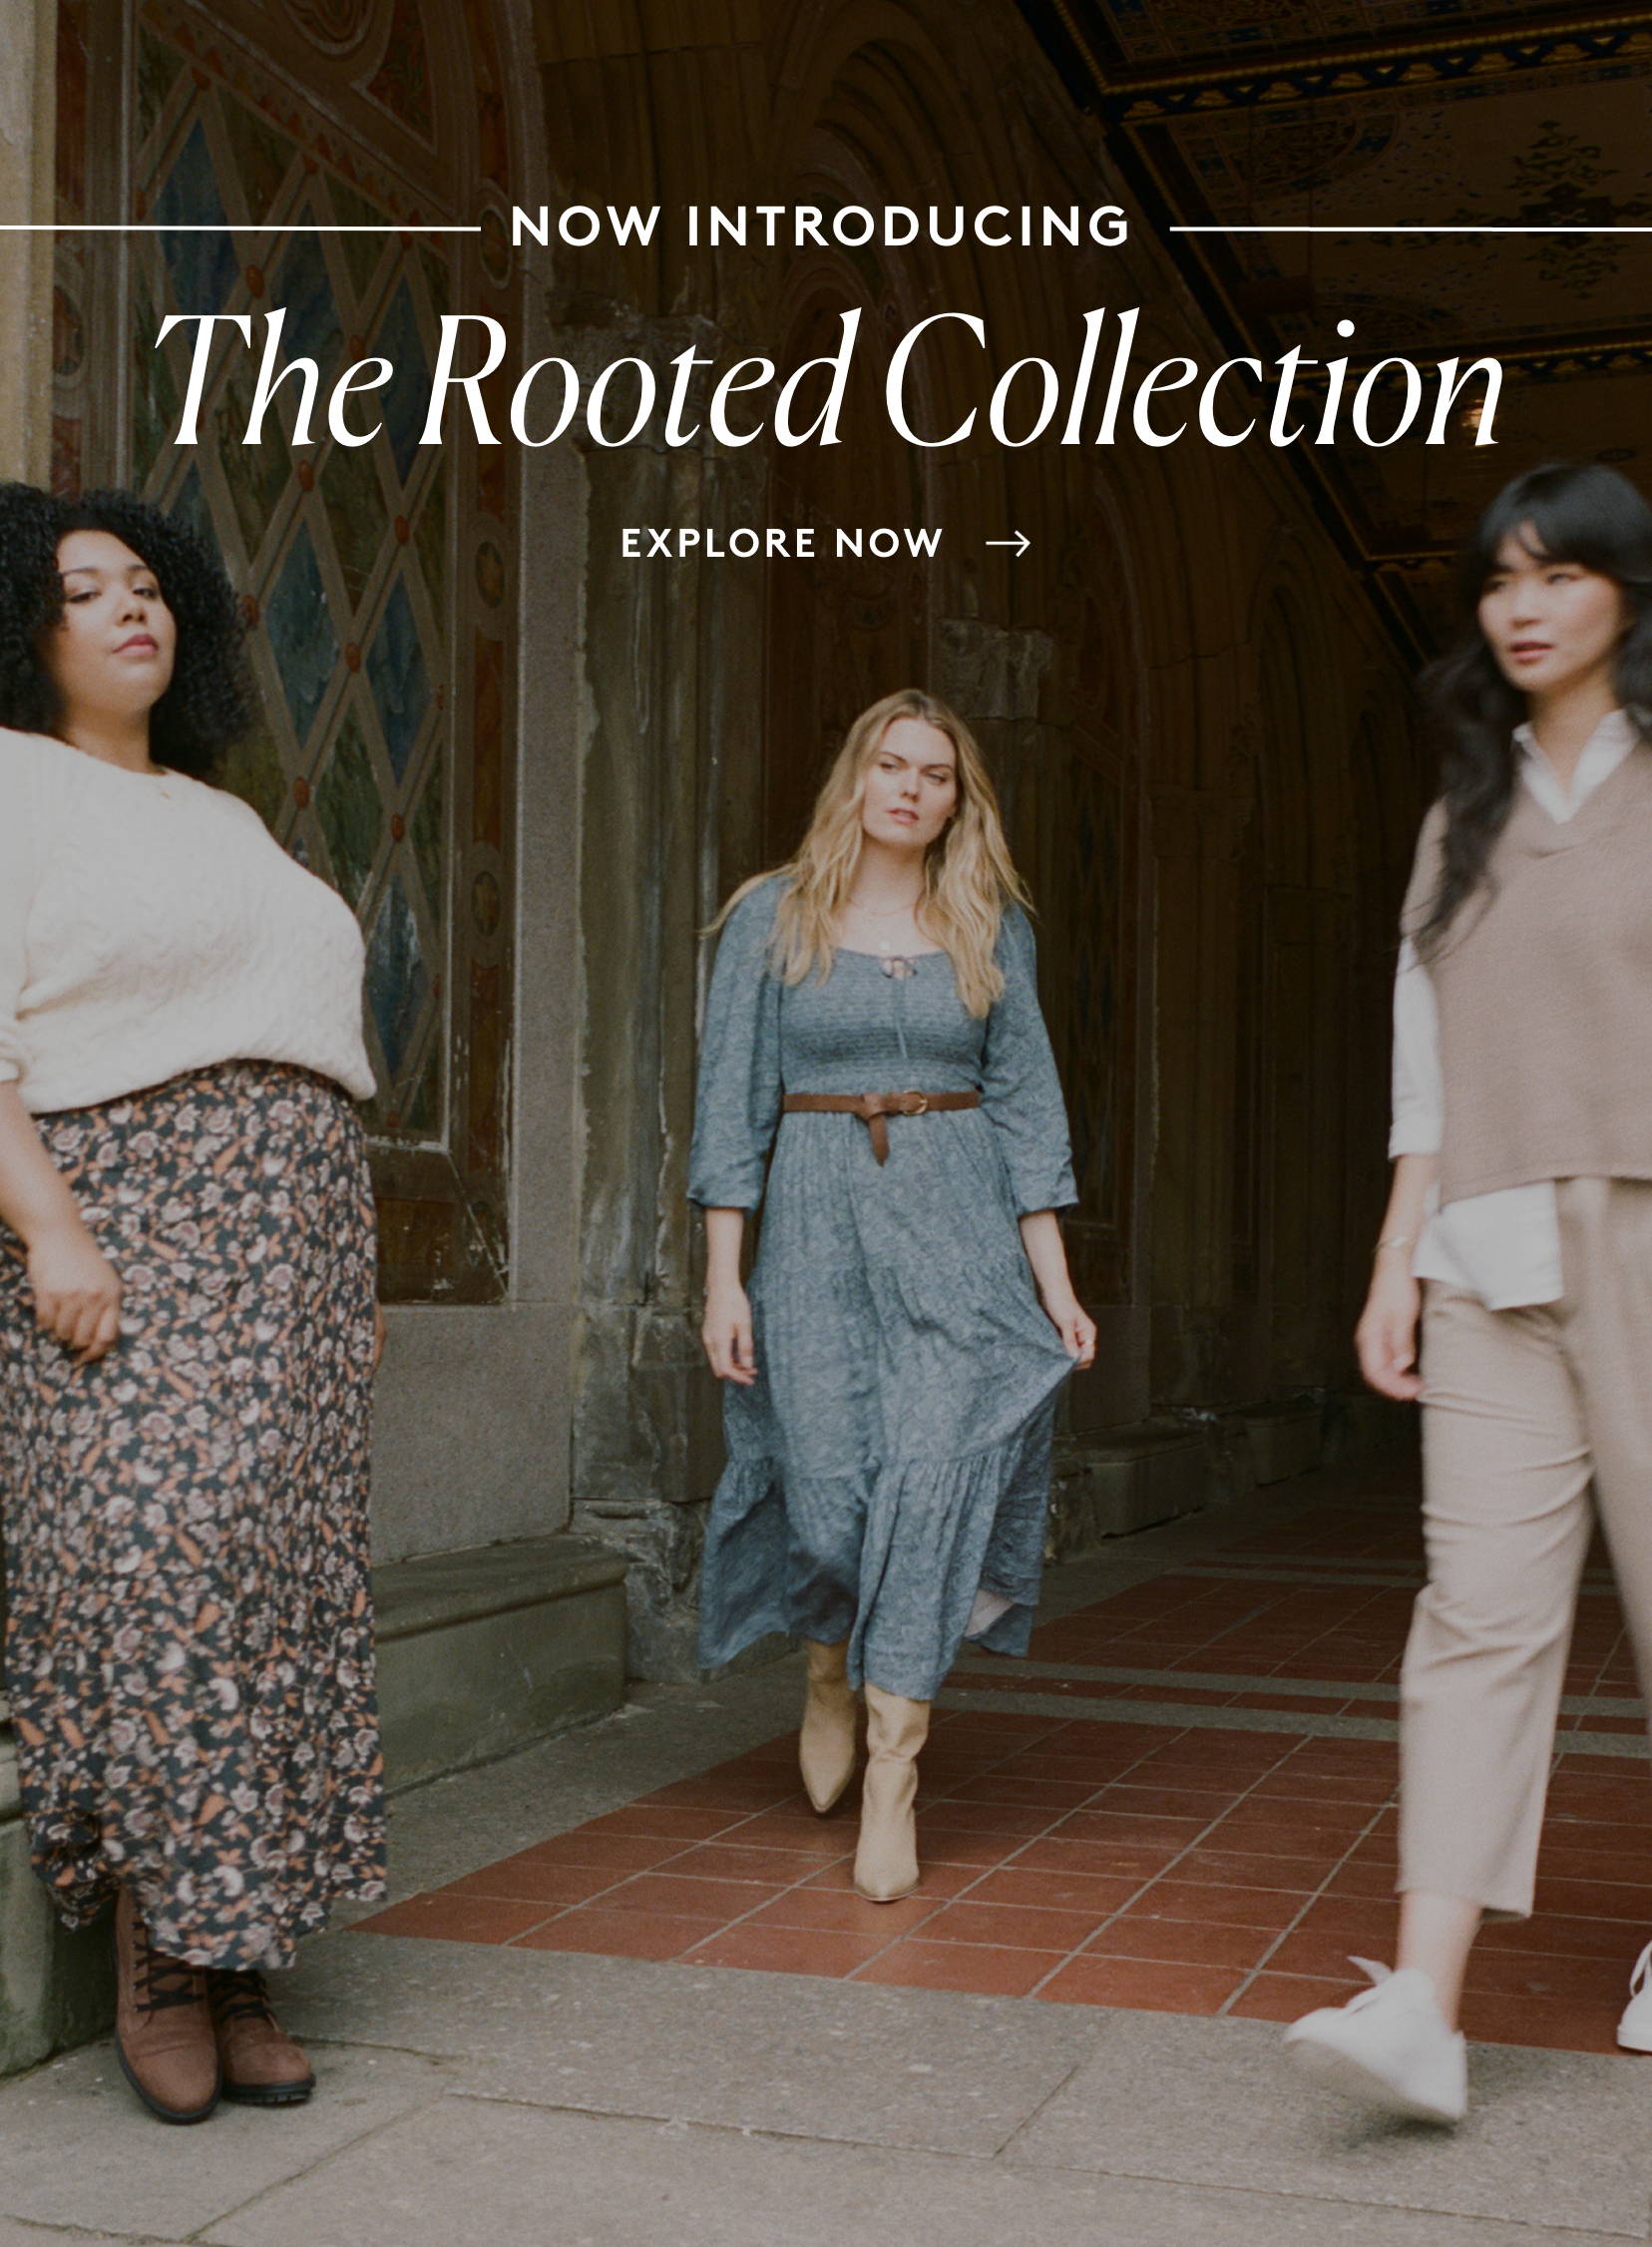 The Rooted Collection